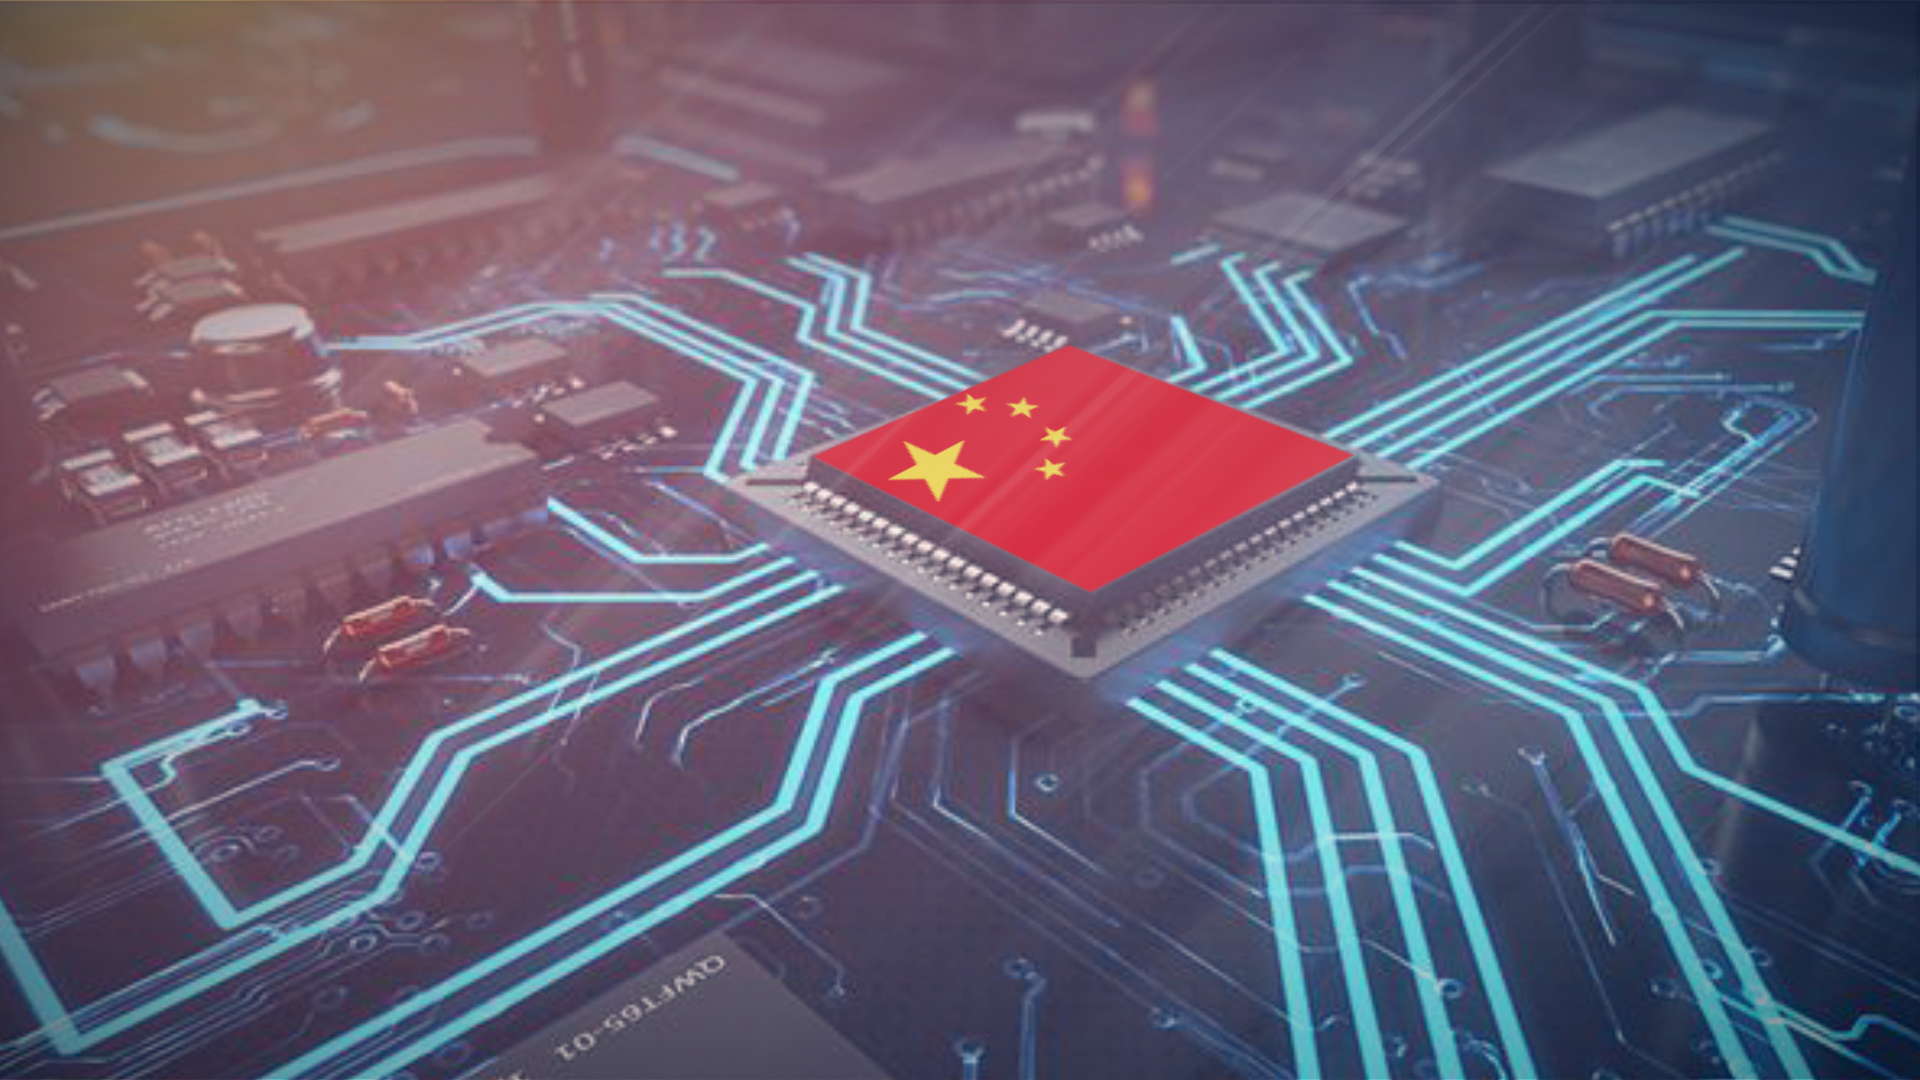  A computer chip with the Chinese flag on it, representing the country's initiative to develop its own AI chips.